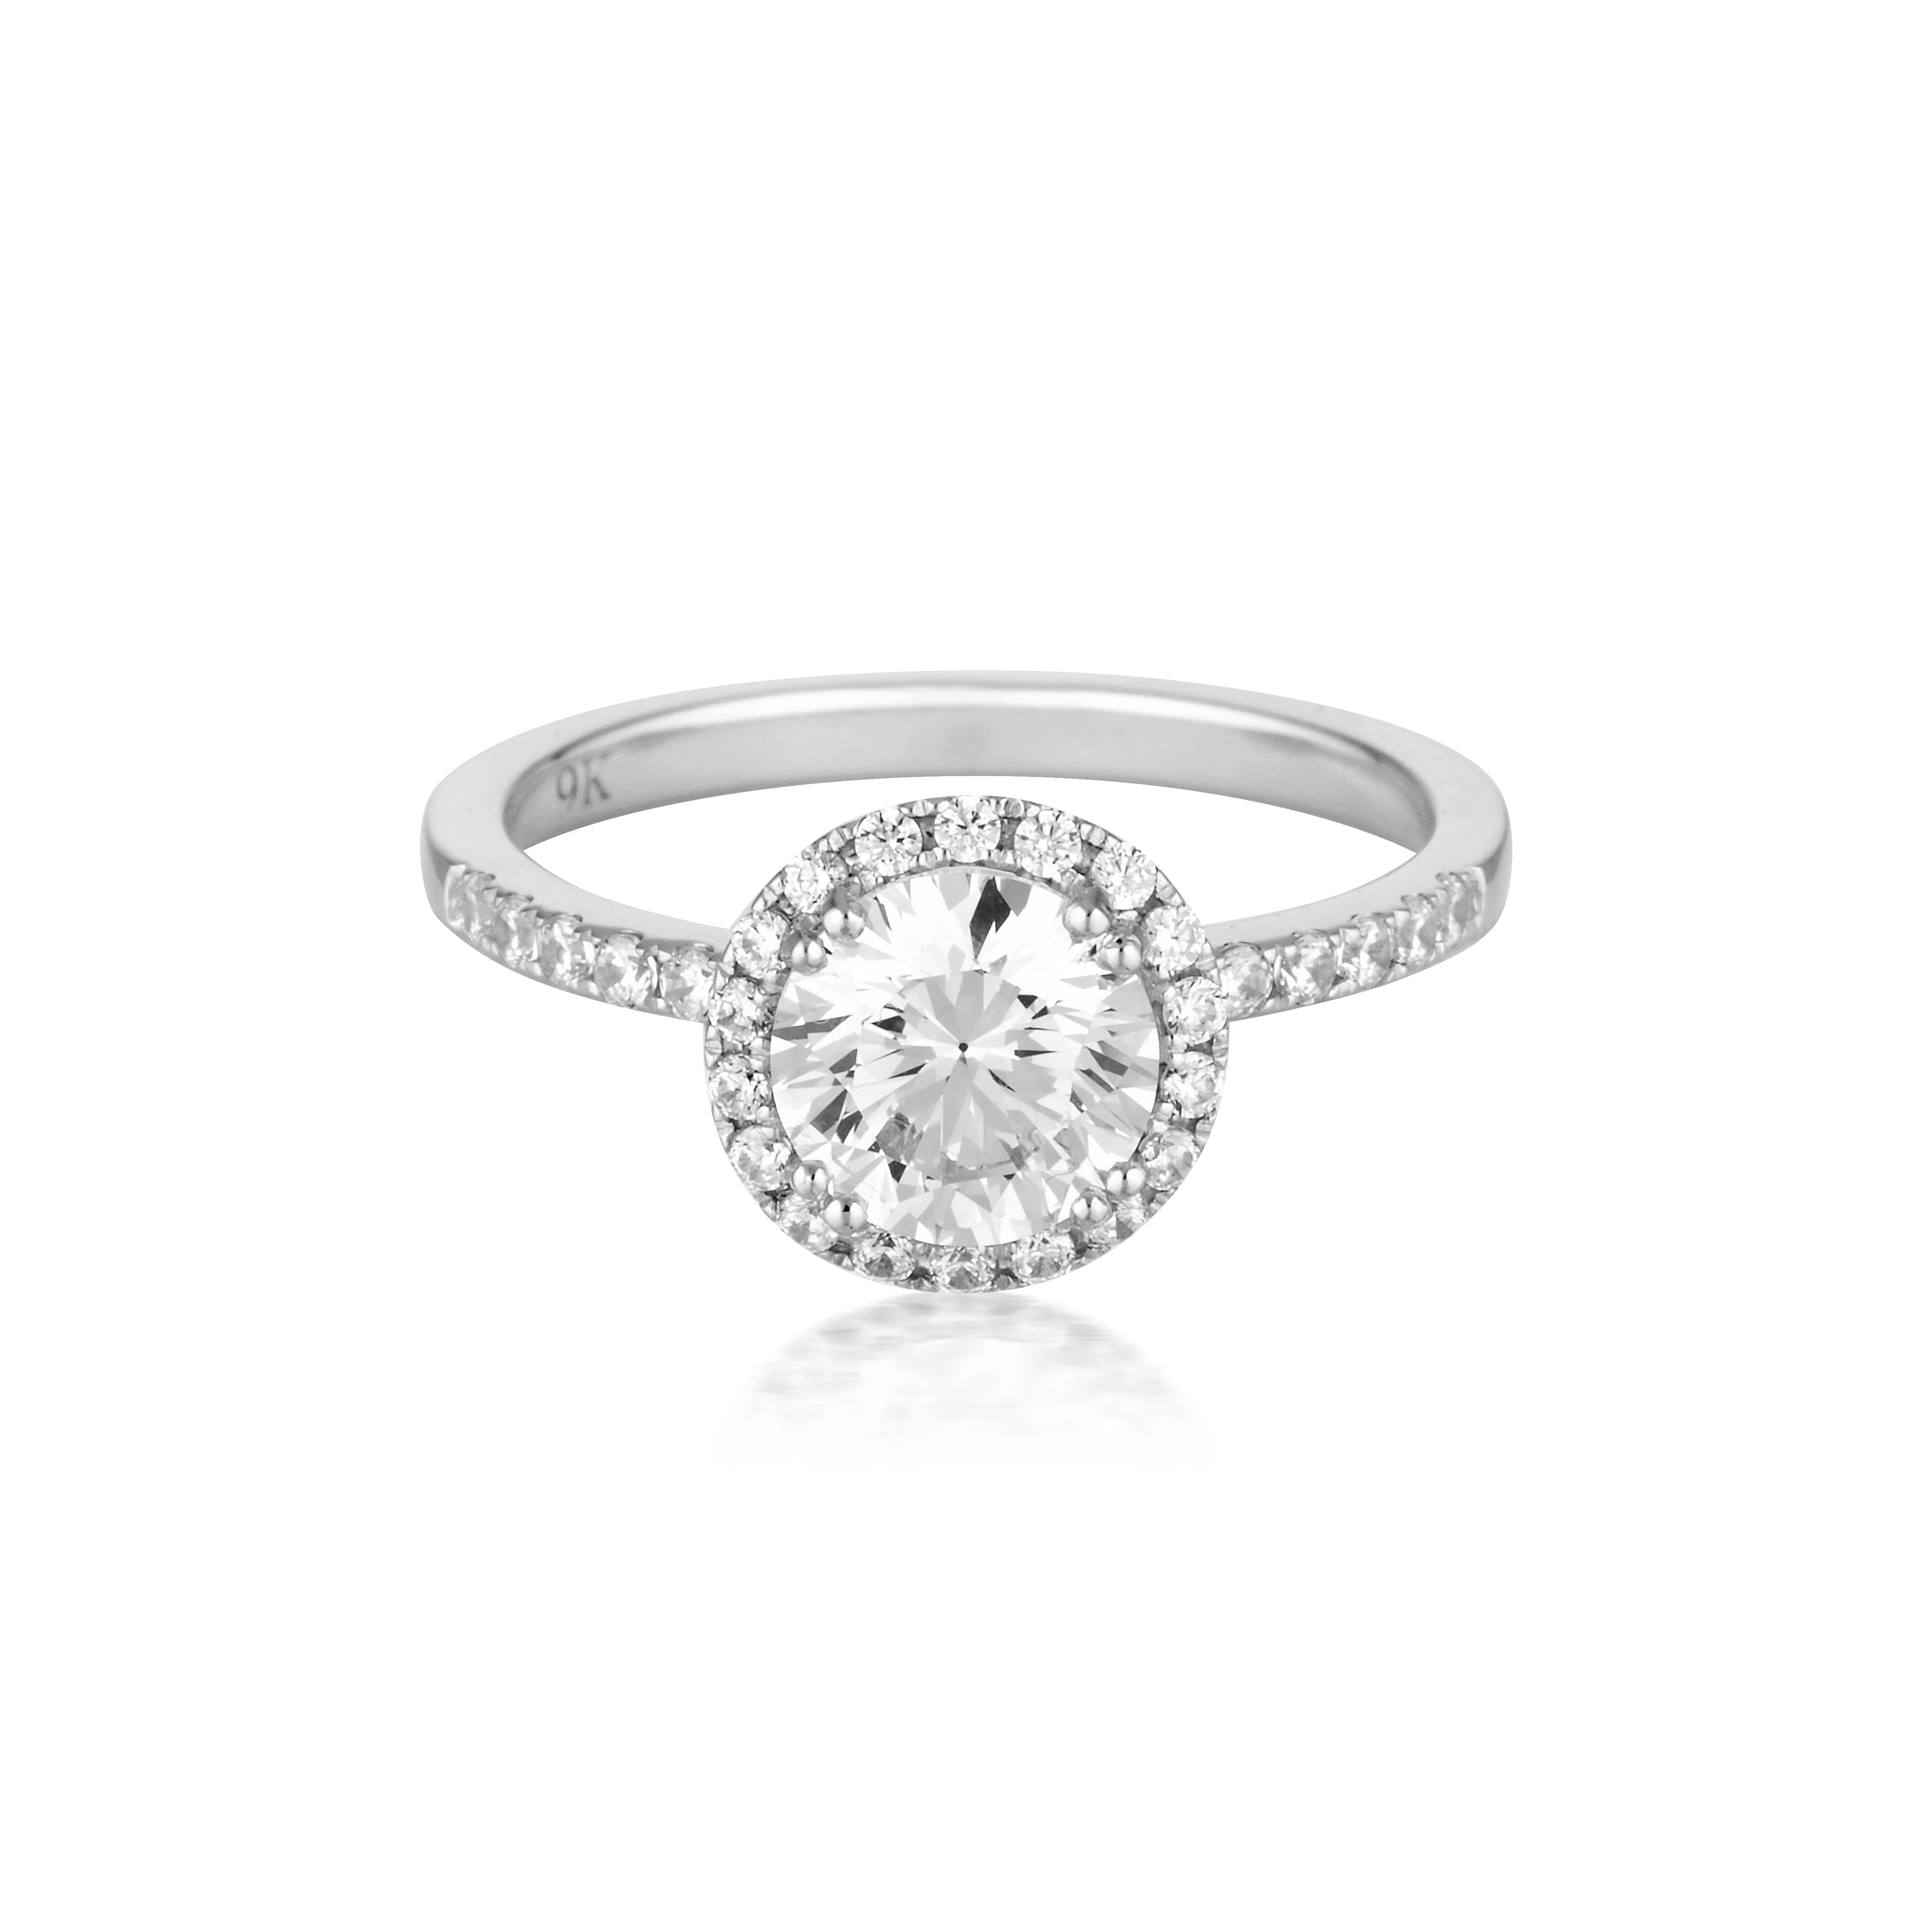 ROUND BRILLIANT CUT 1.25CTW HALO MOISSANITE ENGAGEMENT RING IN 9CT WHITE GOLD